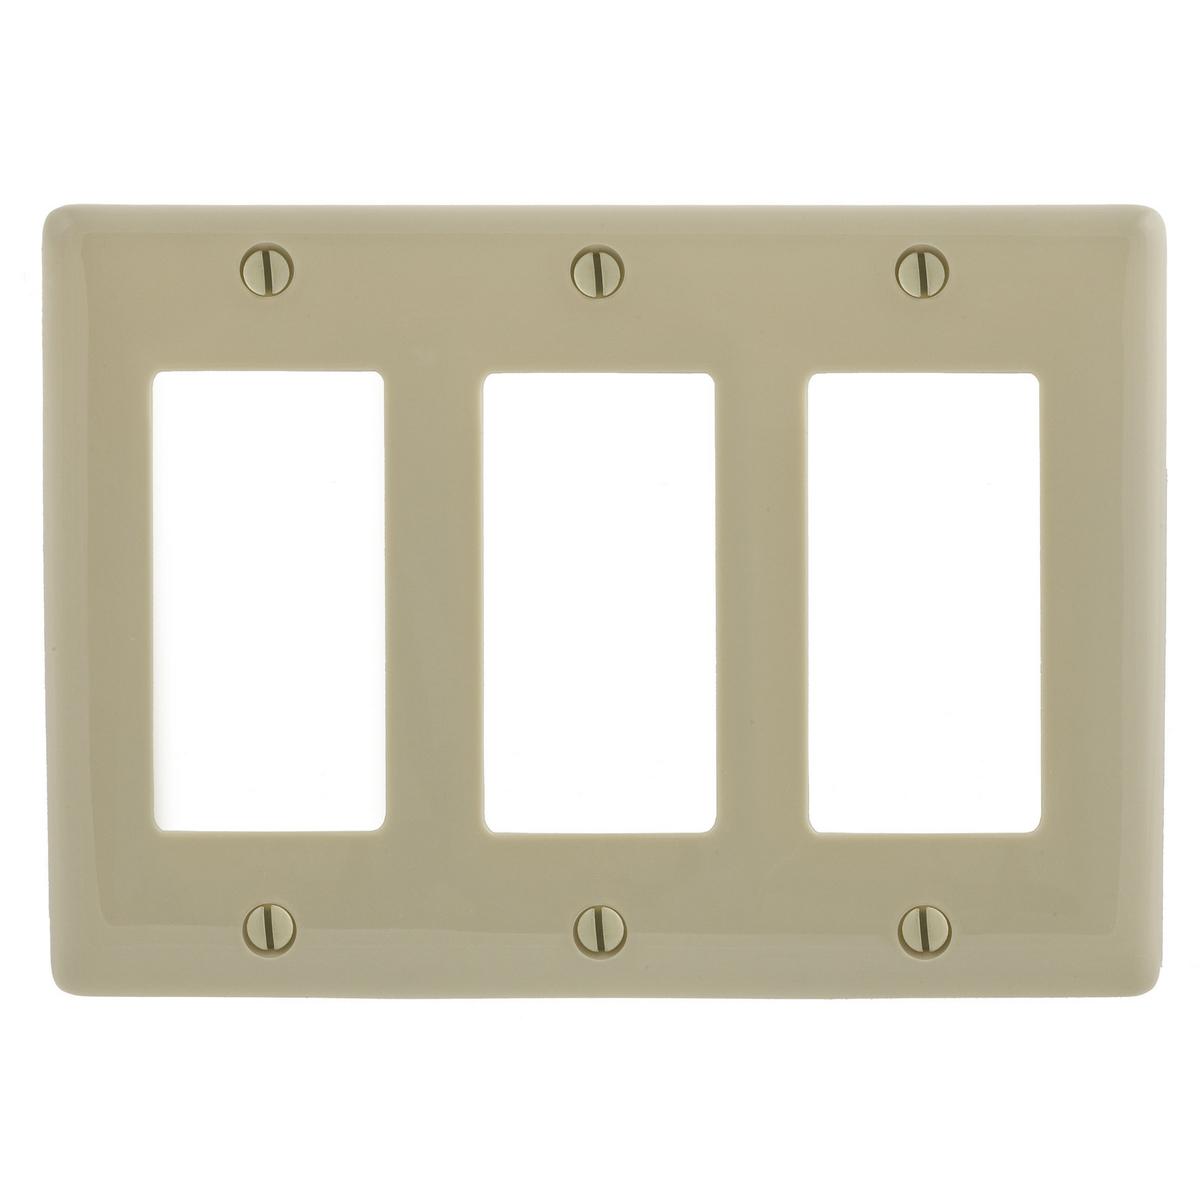 Hubbell NP263I Wallplates and Box Covers, Wallplate, Nylon, 3-Gang, 3) Decorator, Ivory  ; Reinforcement ribs for extra strength ; Captive screw feature holds mounting screw in place ; High-impact, self-extinguishing nylon material ; Standard Size is 1/8" larger to give